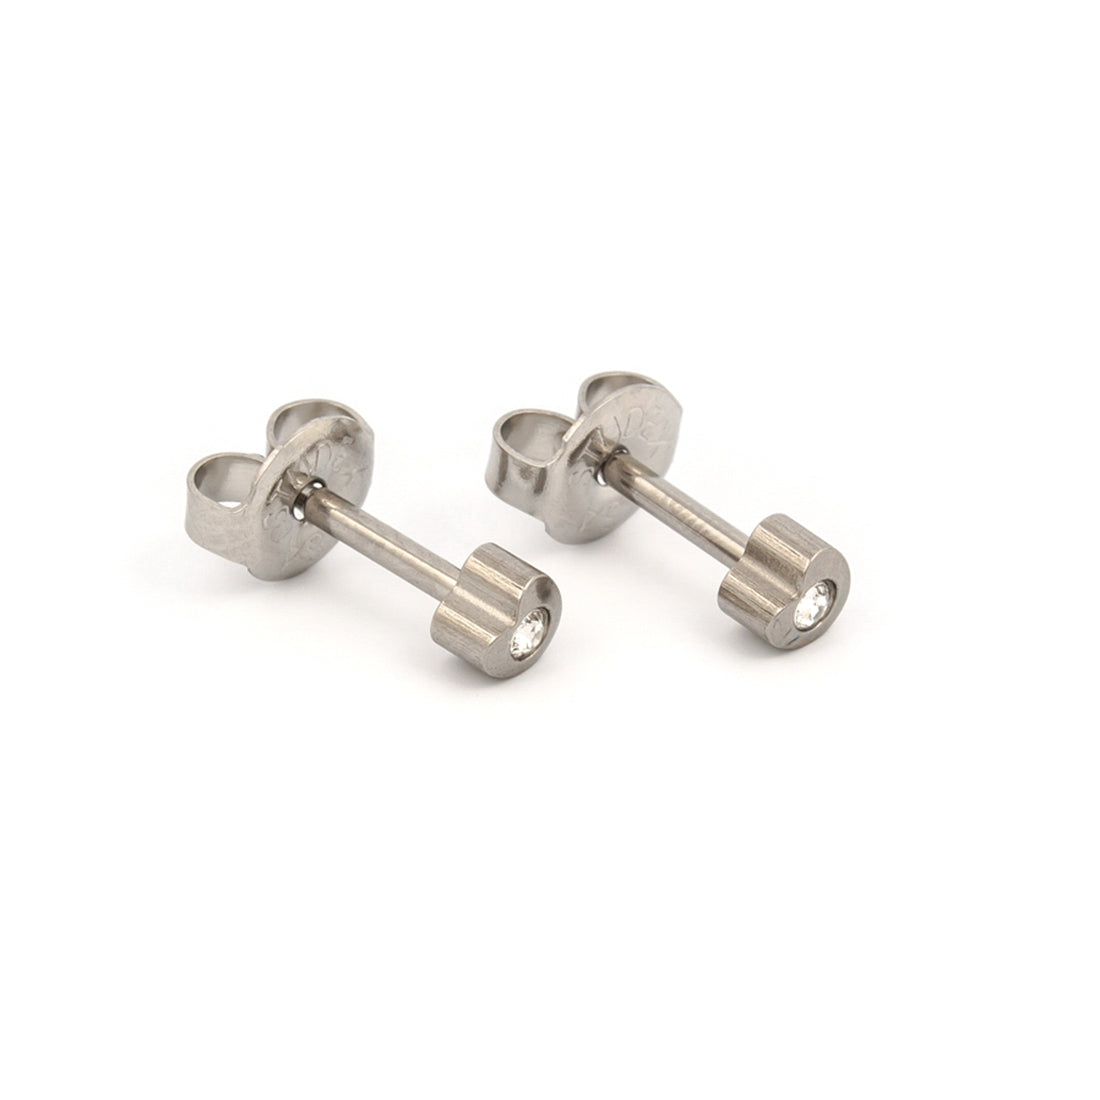 3MM Heartlite Studs Allergy free Stainless Steel Ear Studs | MADE IN USA | Ideal for everyday wear